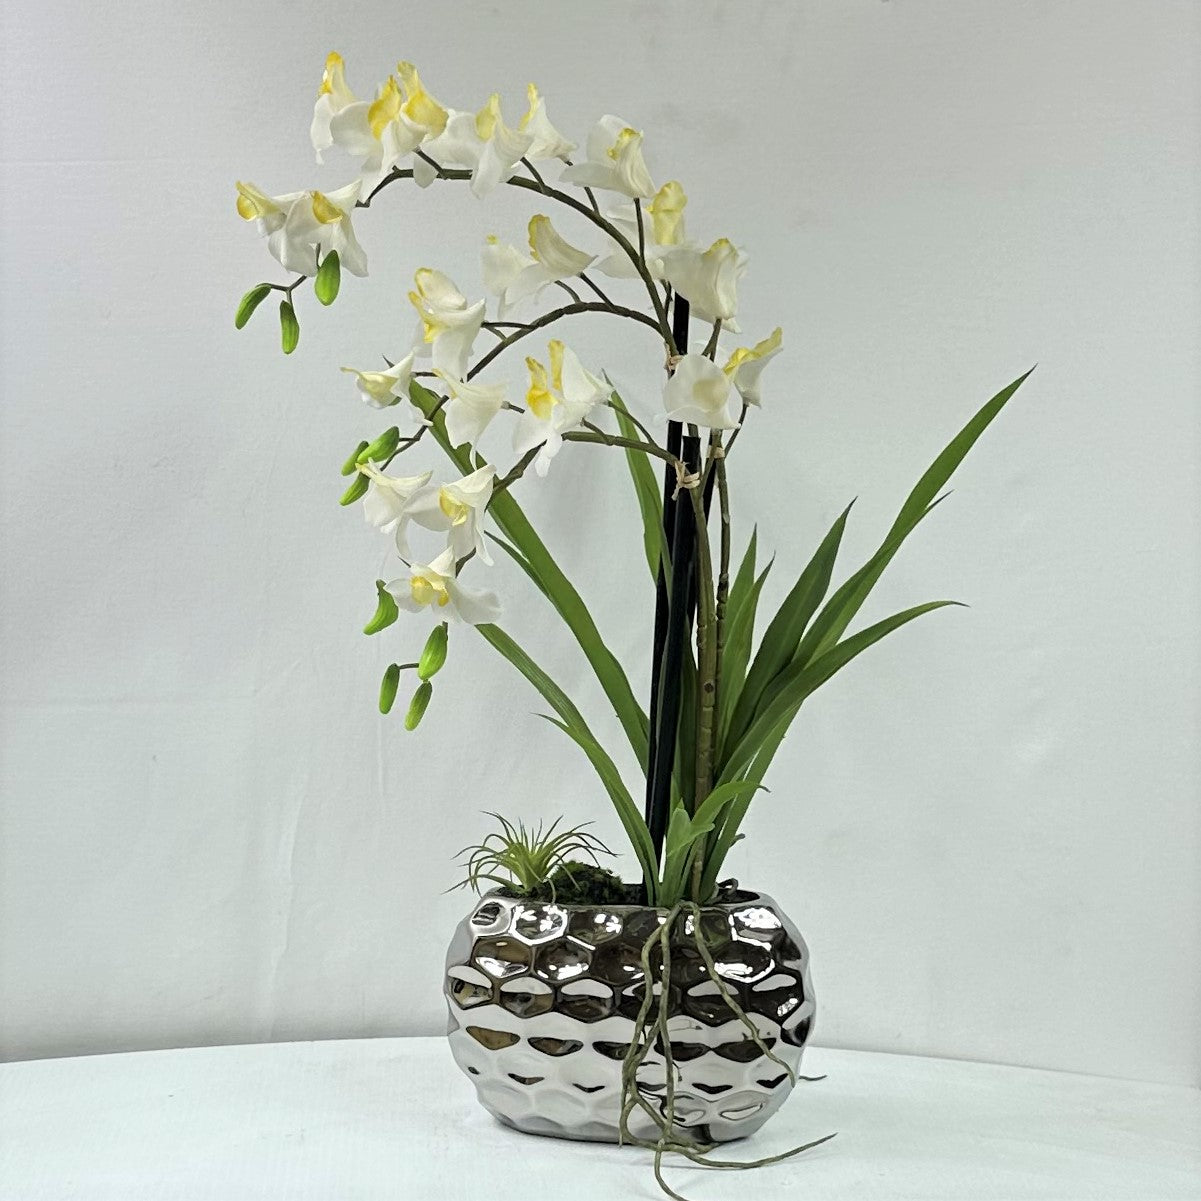 Dendrobium Orchid X 3 in silver vase